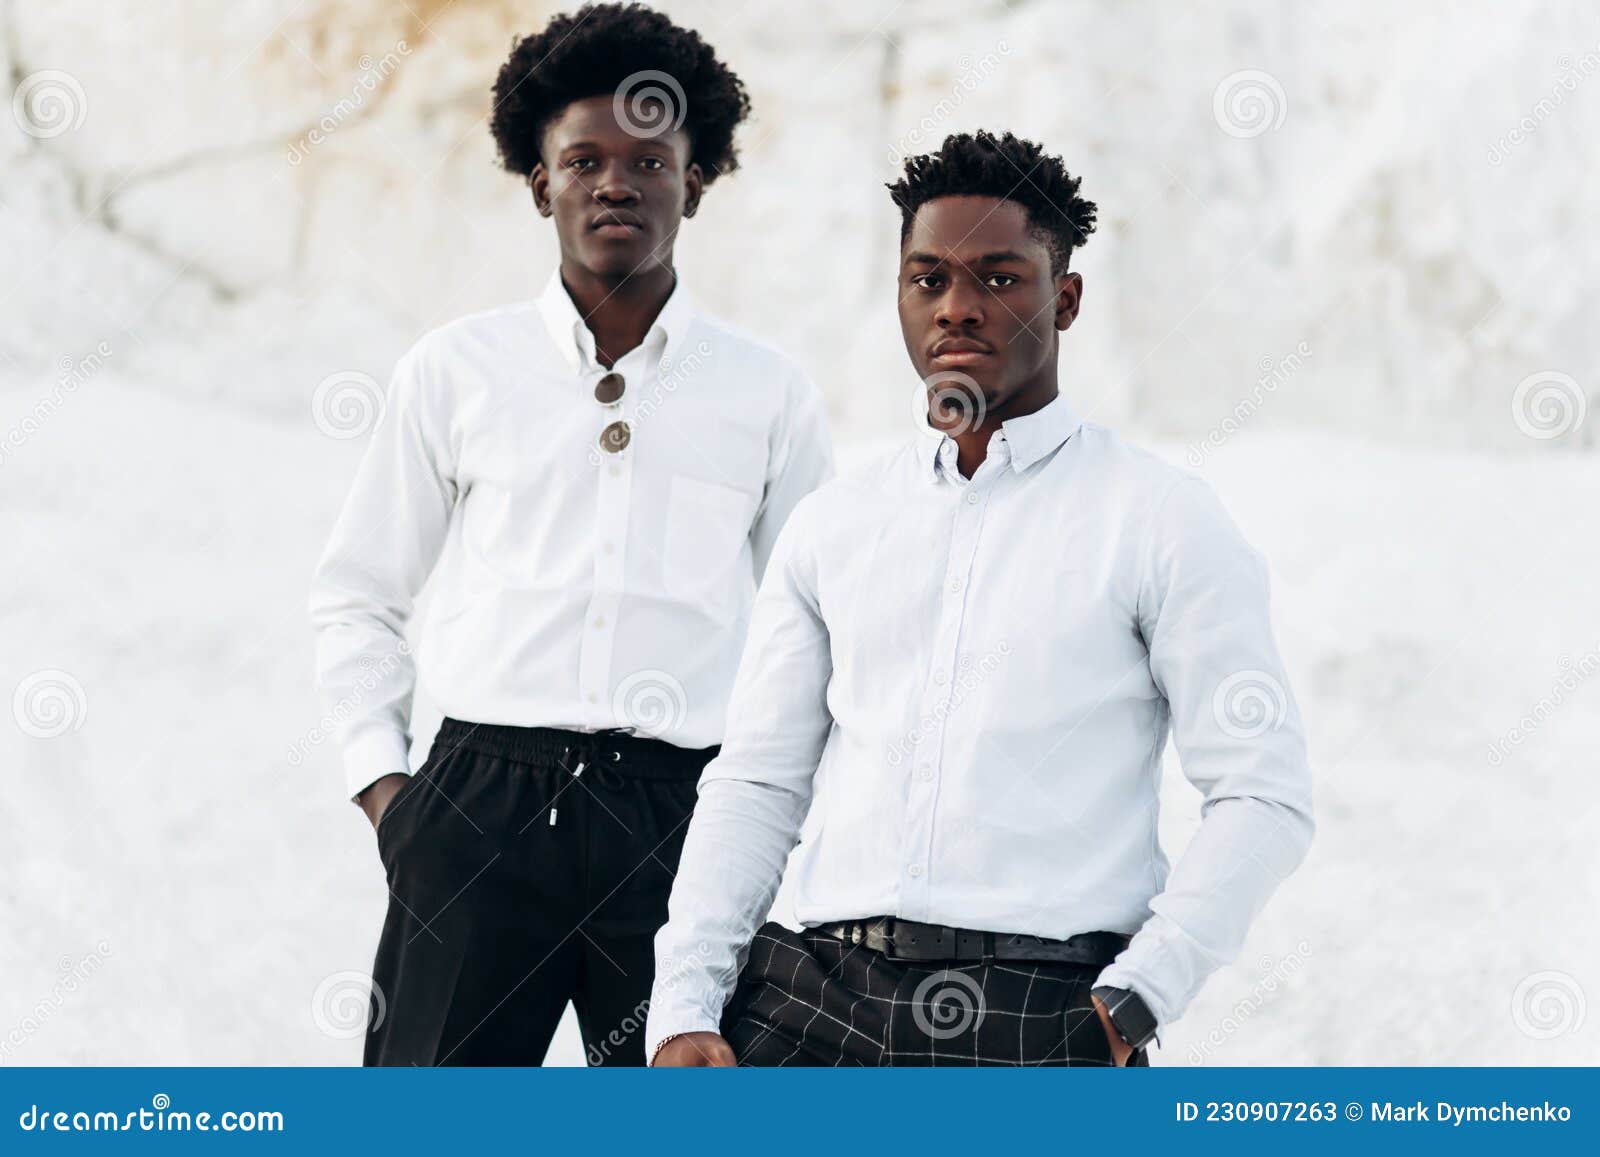 two trendy black men, fashion portrait of african american male models, in white shirts, outdoors